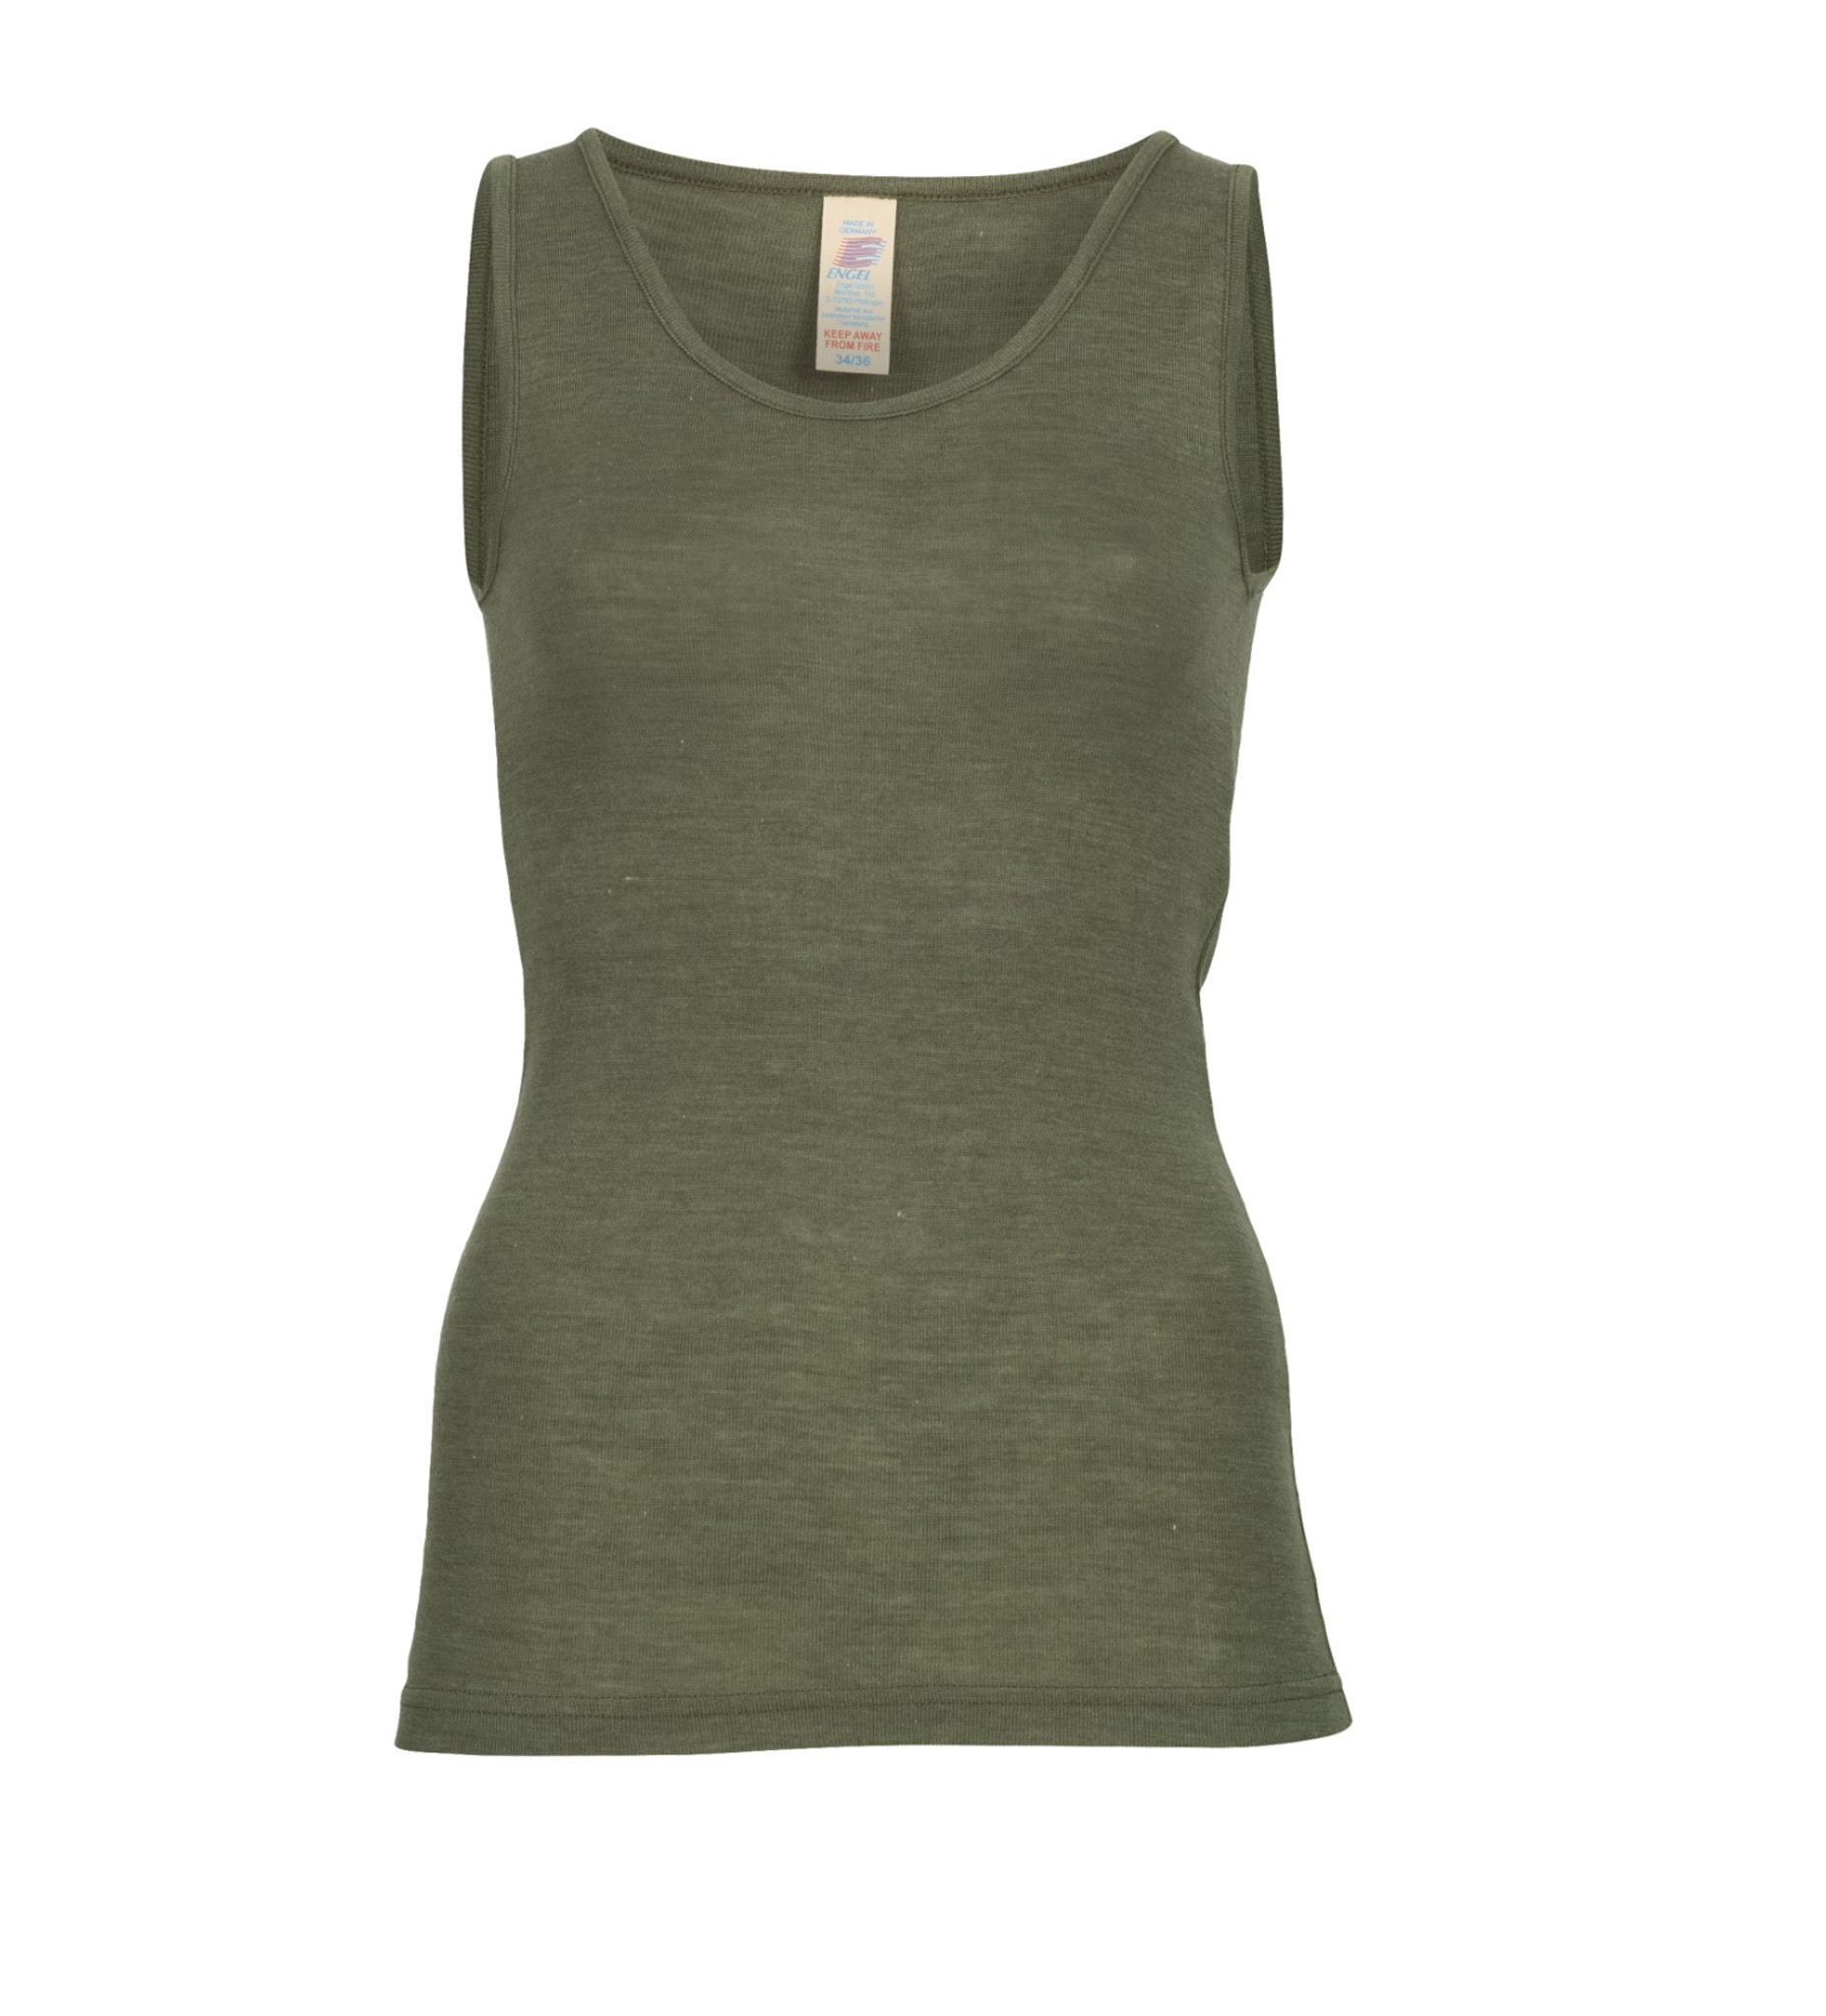 Organic Silk Women's Camisole with Double Straps - Little Spruce Organics